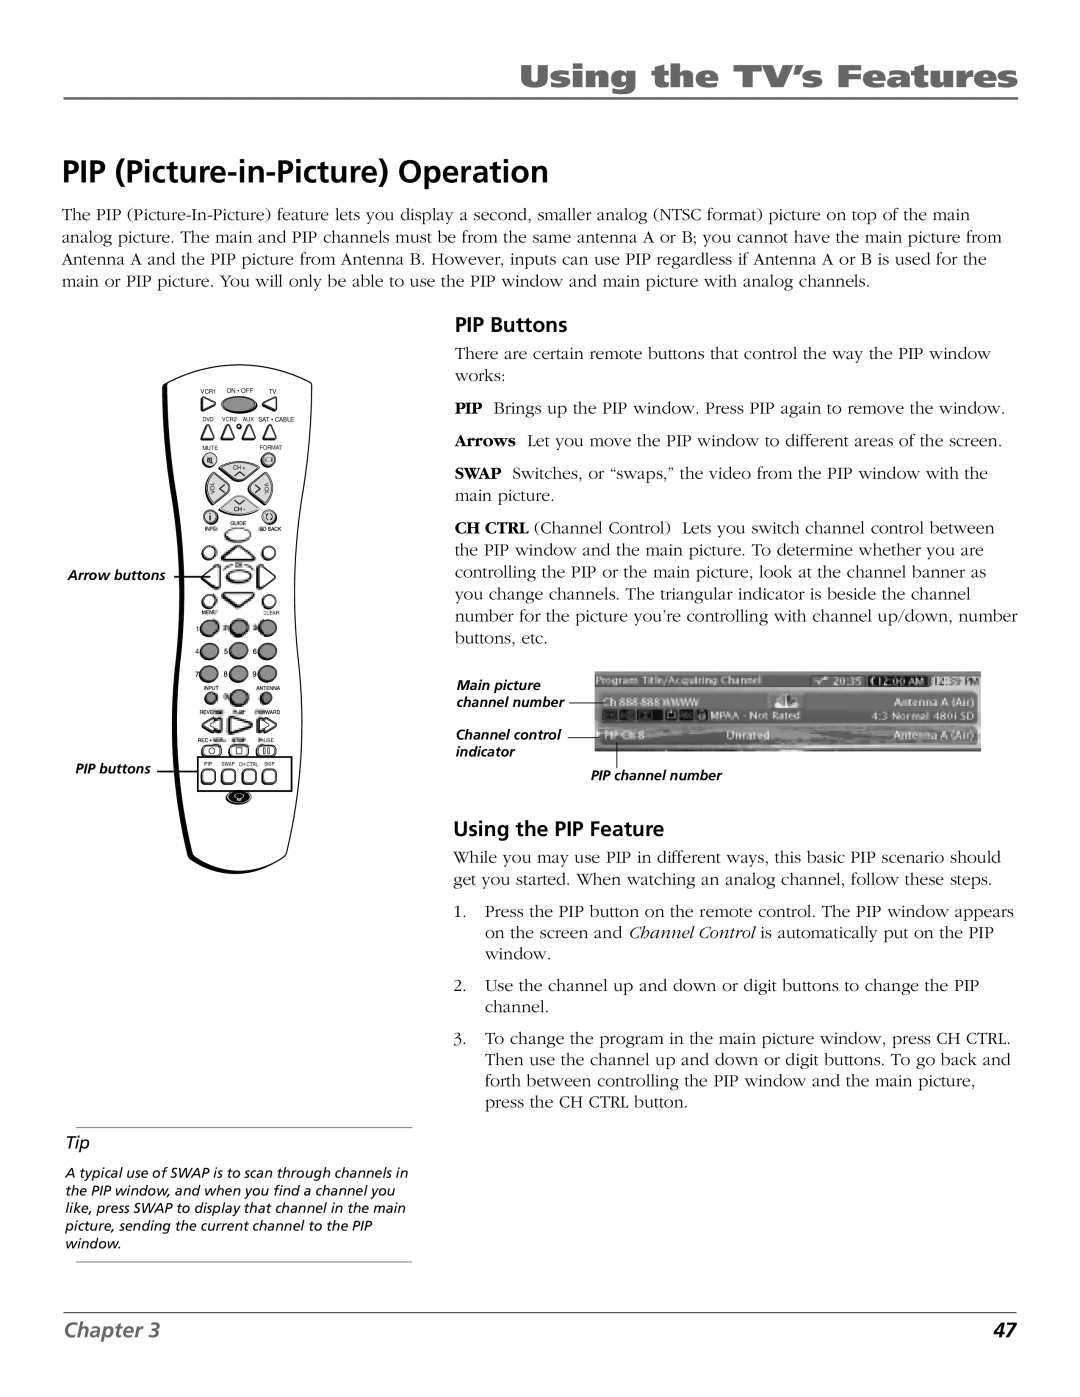 RCA HD65W140, HD61W140 manual PIP Picture-in-Picture Operation, PIP Buttons, Using the PIP Feature 